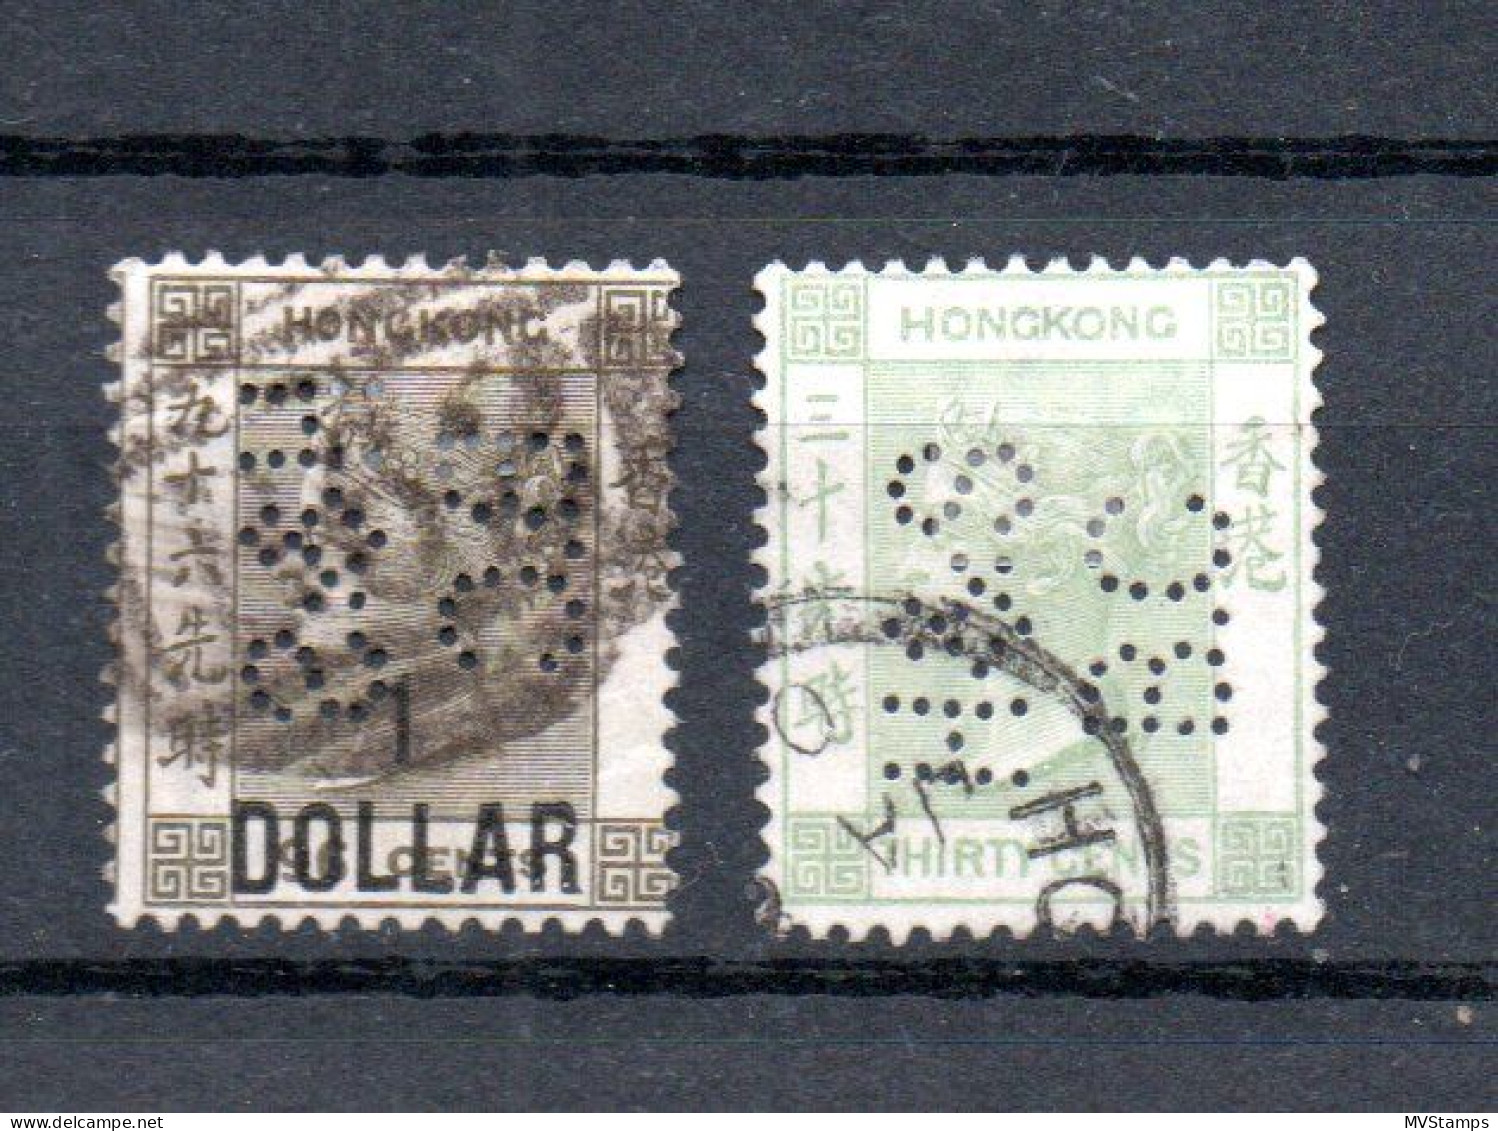 Hong Kong 1885/91 Old Def.Victoria Stamps With Perforation (HSBC) Nice Used - Gebruikt